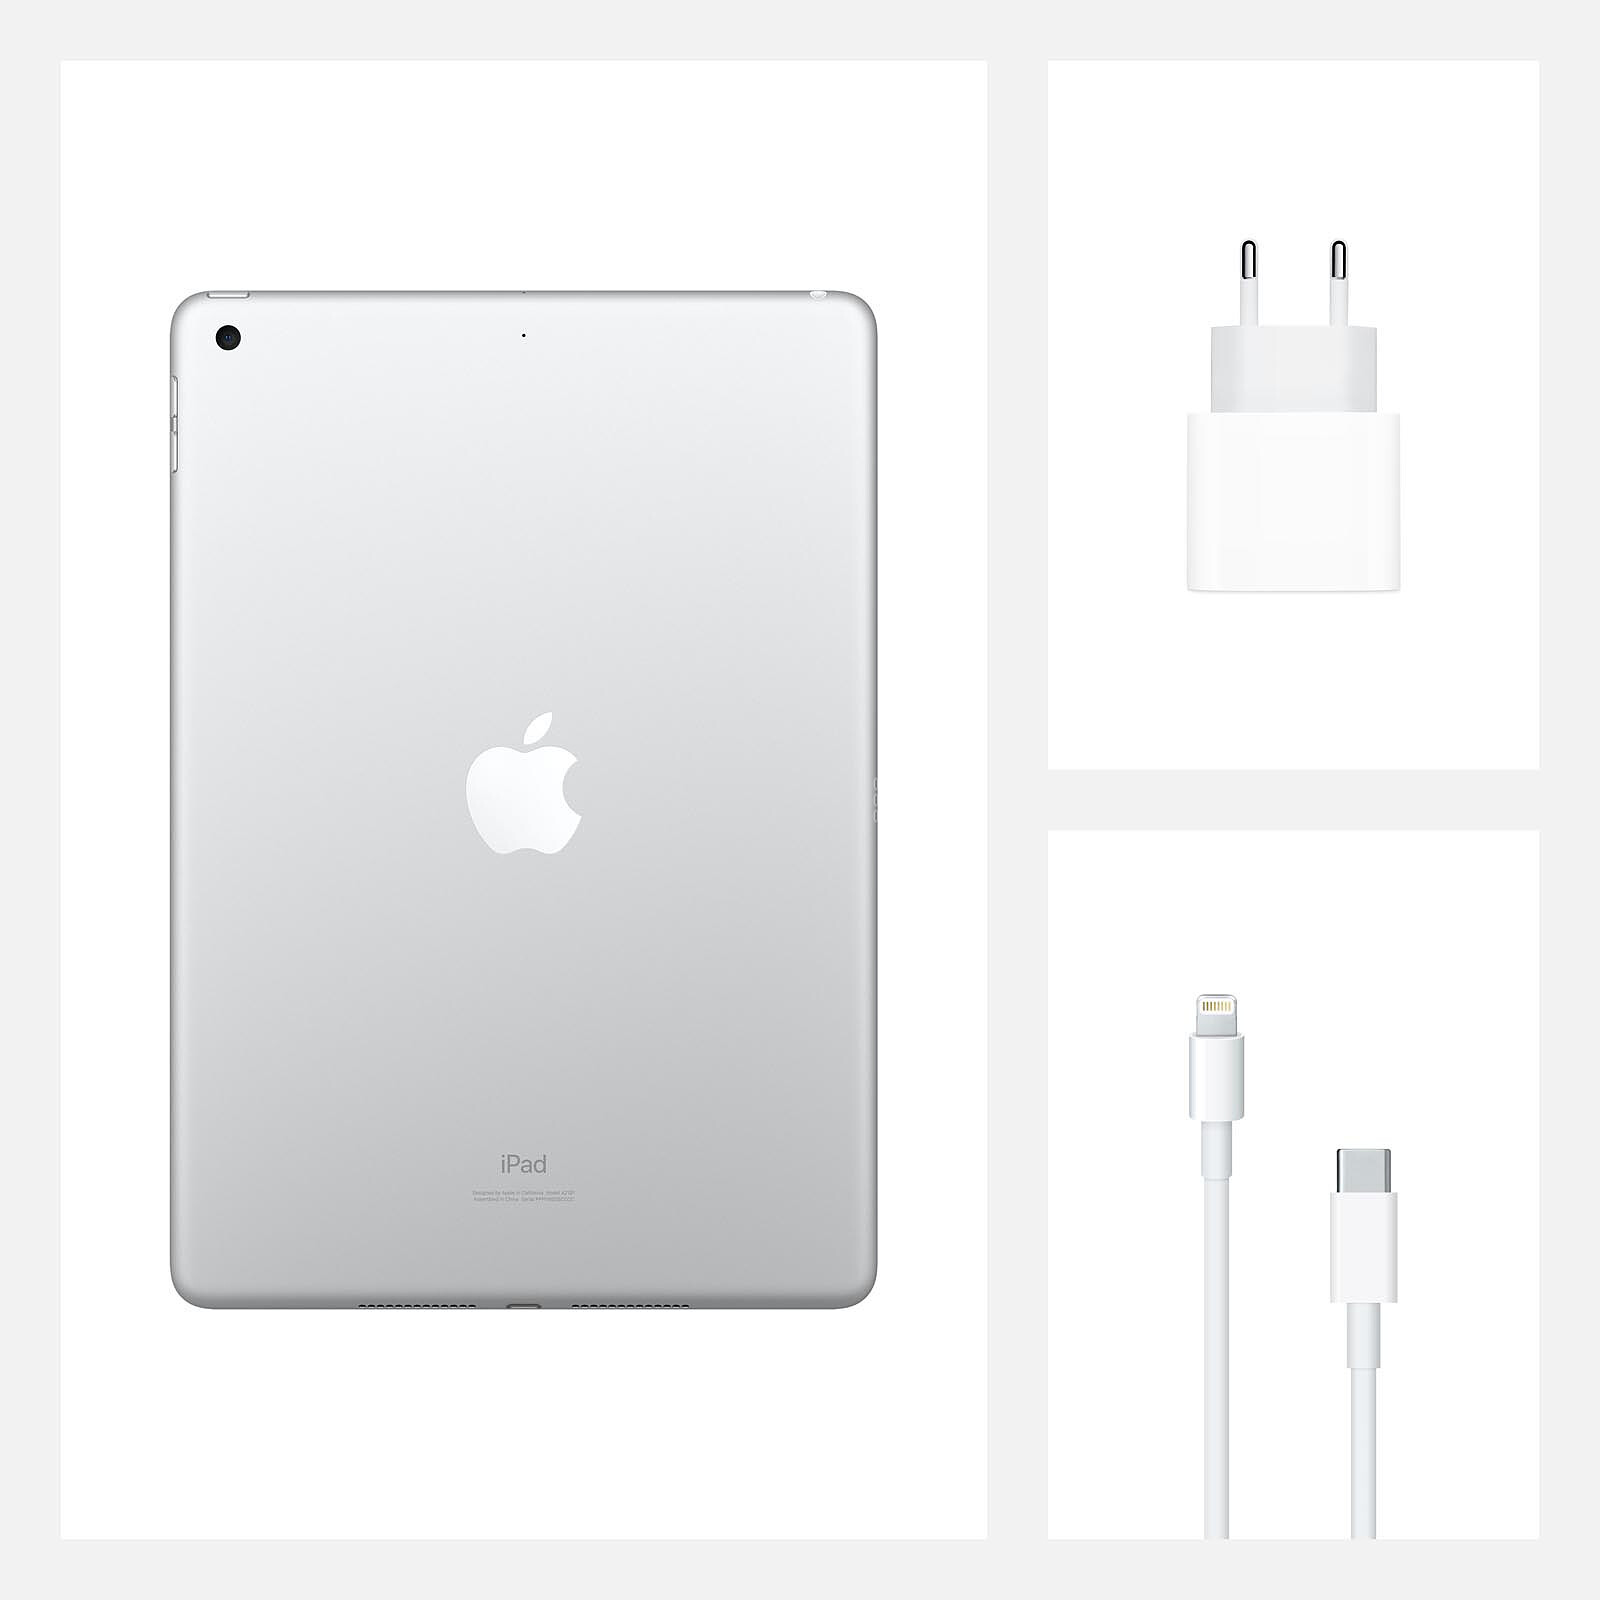 APPLE Tablette tactile iPad Air 2 WiFi - Or - 128 Go pas cher 